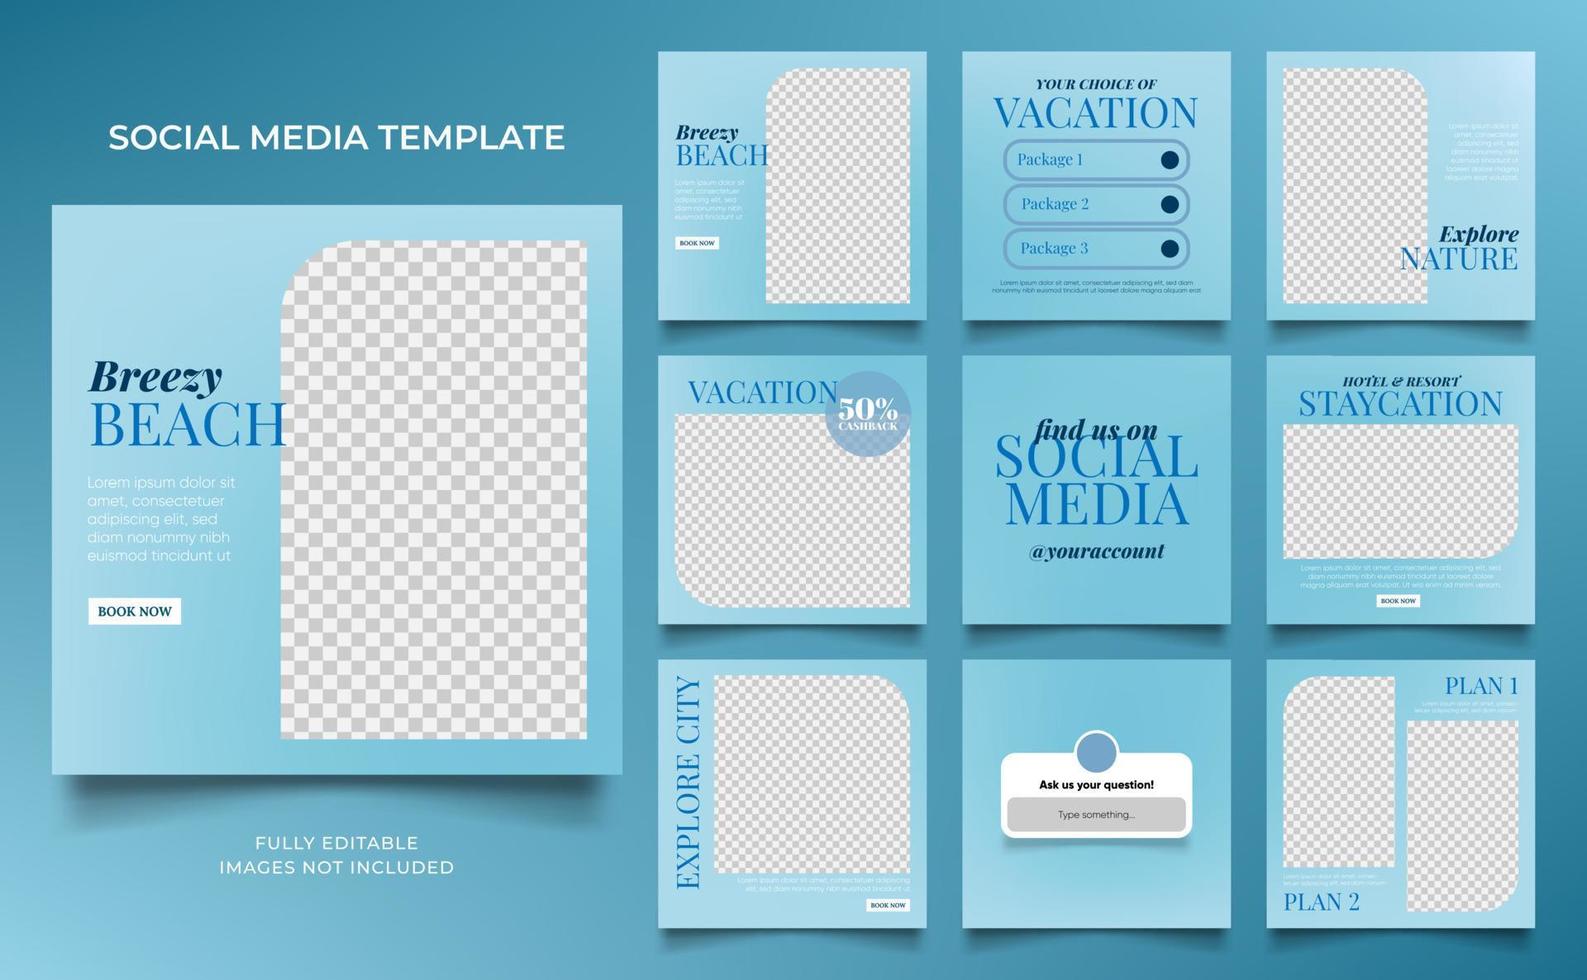 social media template banner travel and vacation service promotion vector